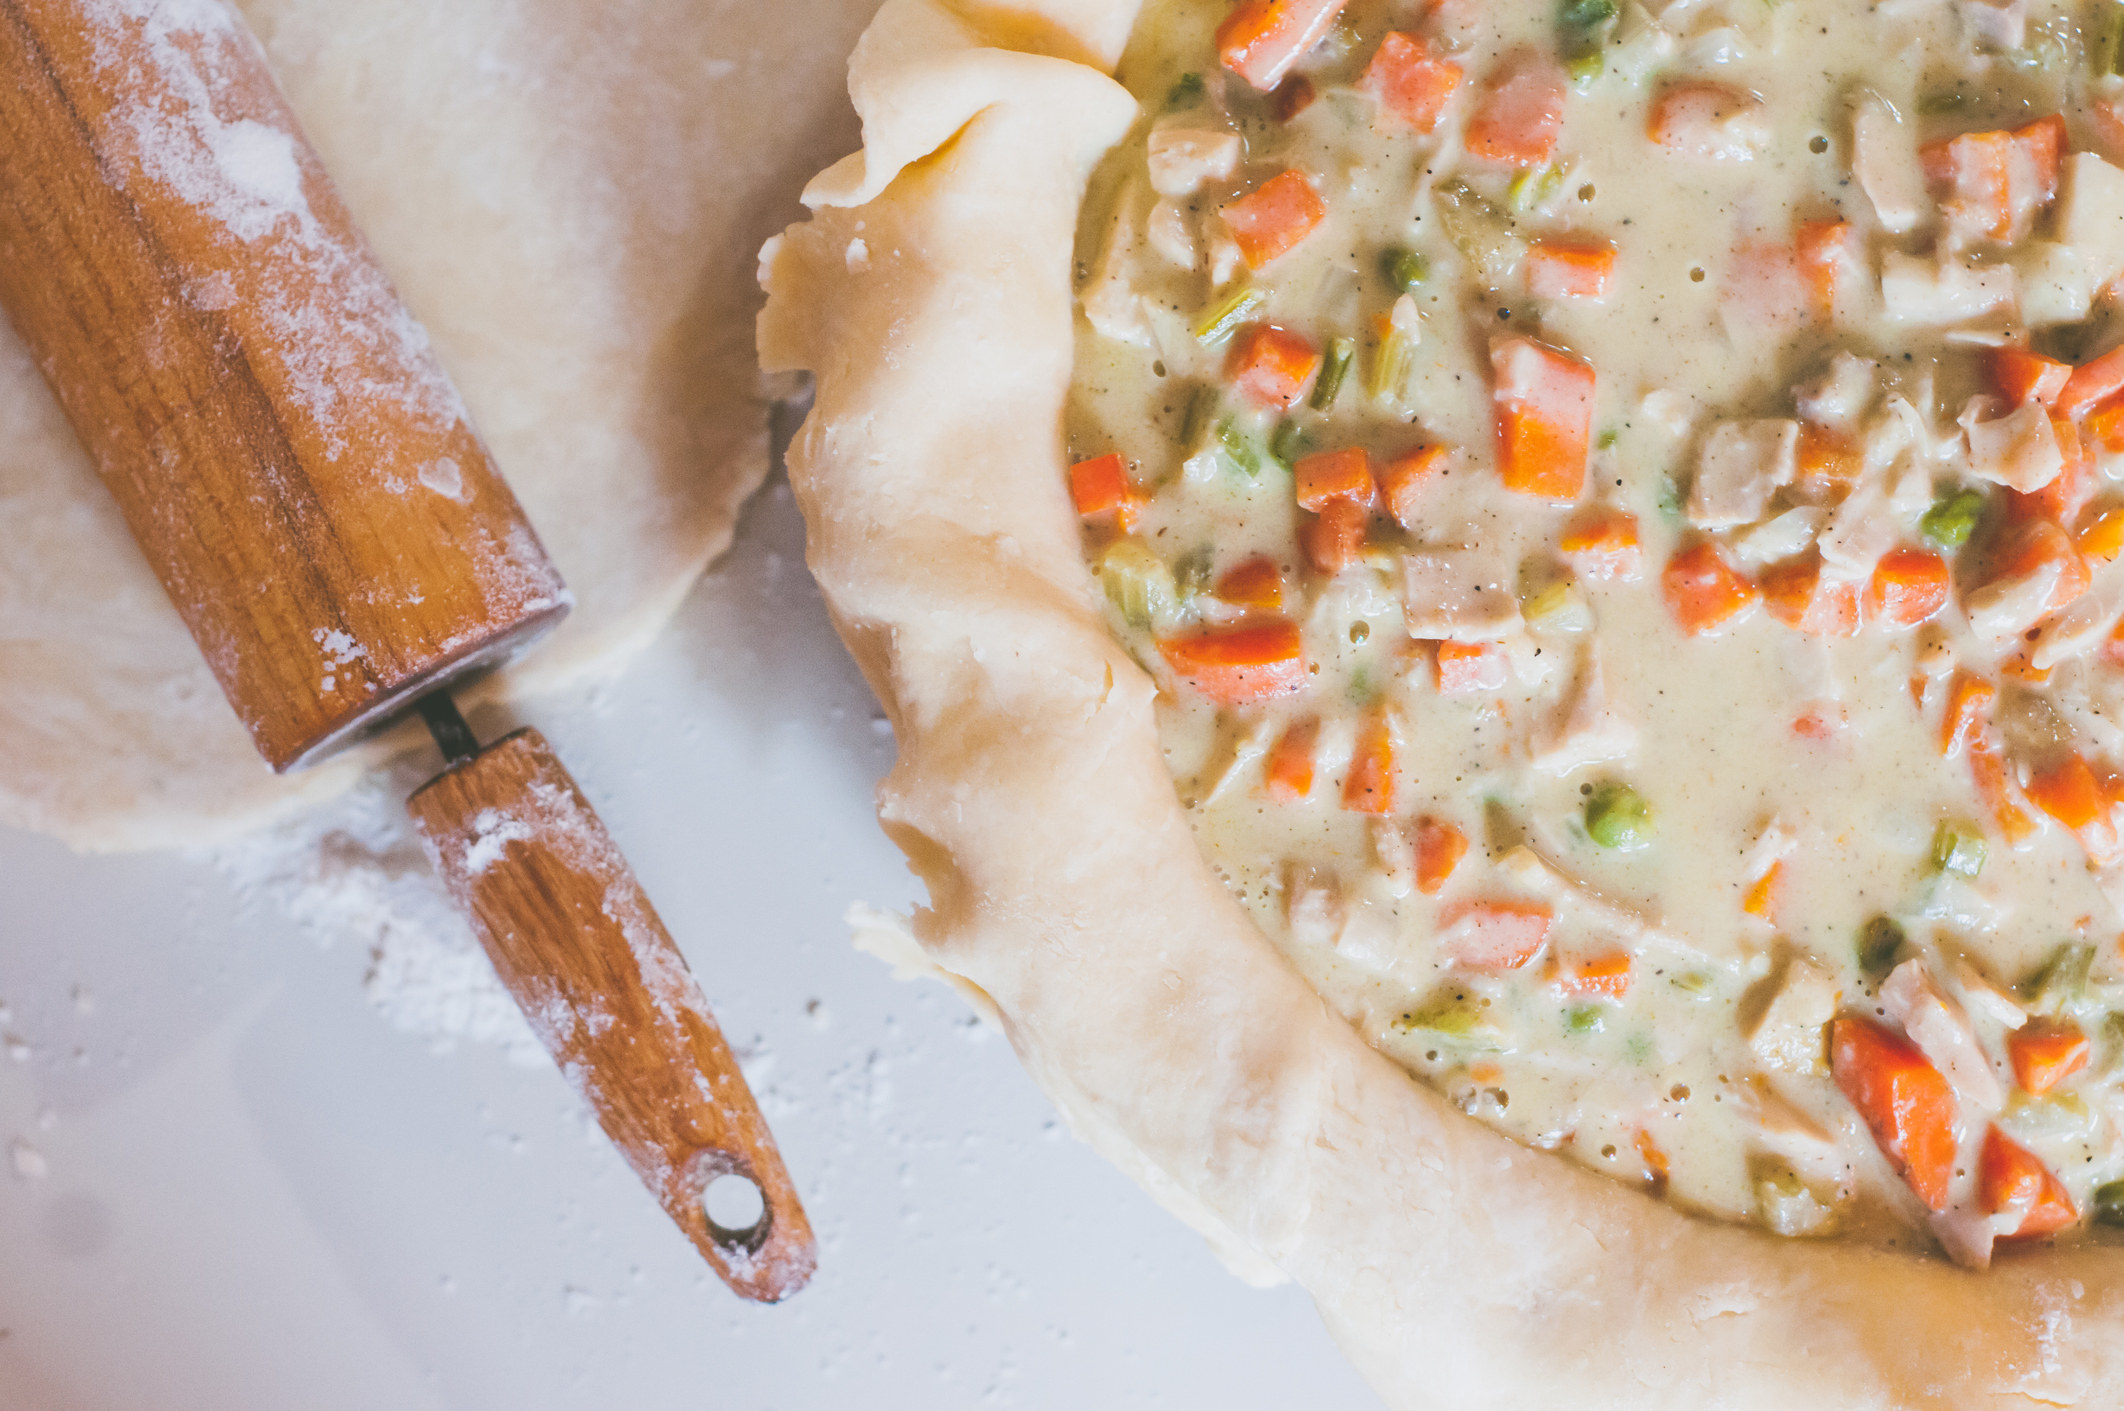 Uncooked chicken and vegetable mixture in a pie crust for chicken pot pie.